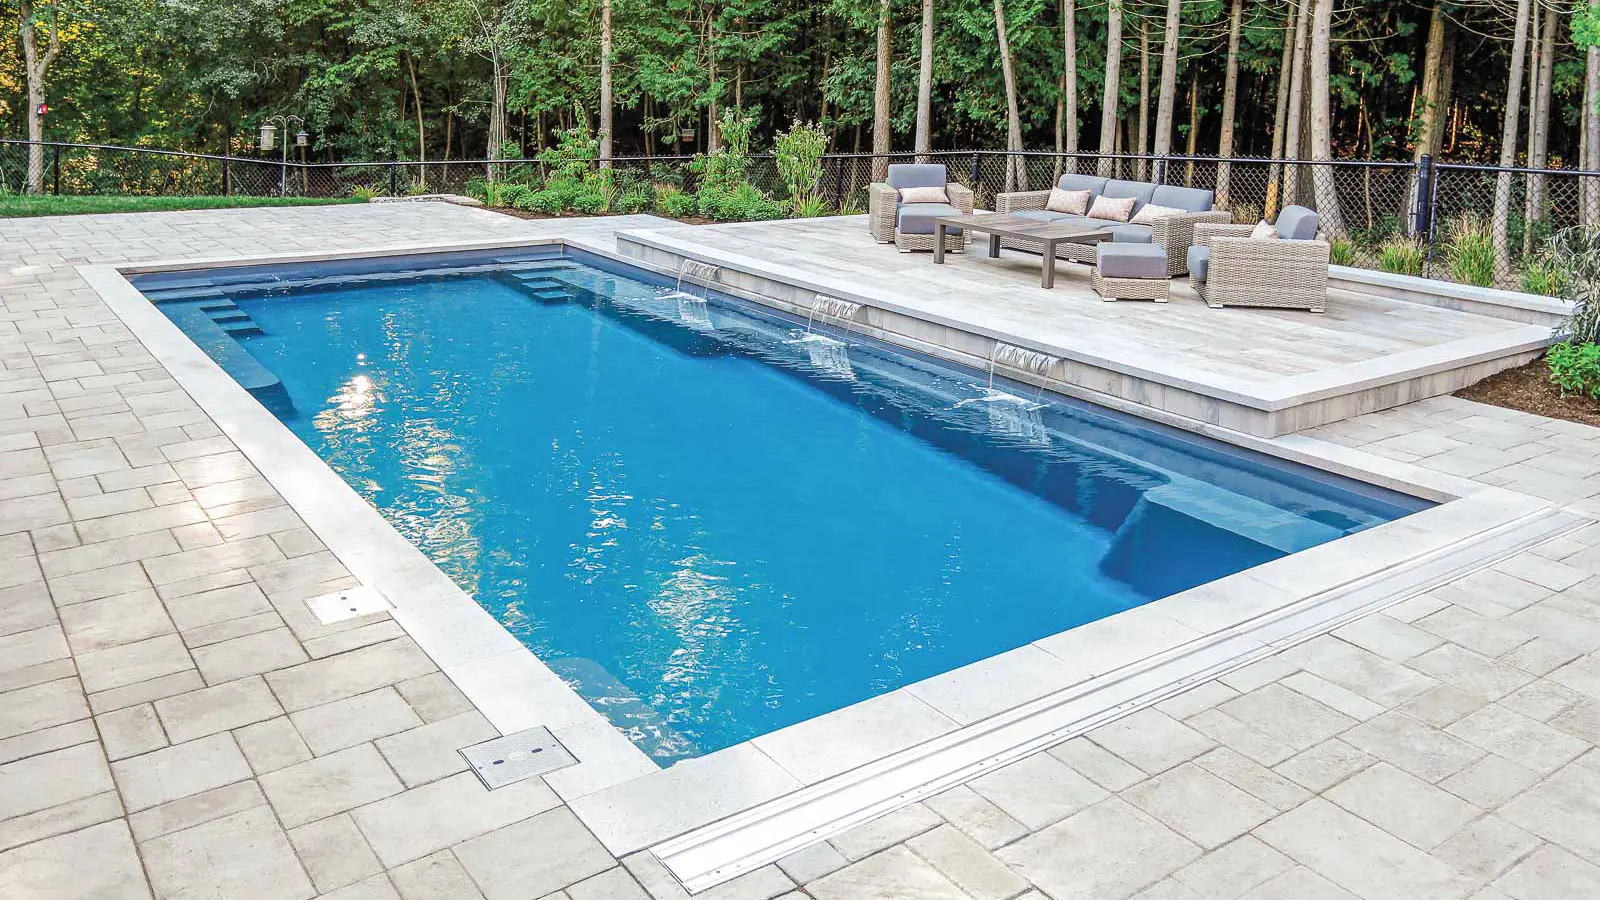 The Supreme, a fiberglass pool with a generous swim area and limited entry steps